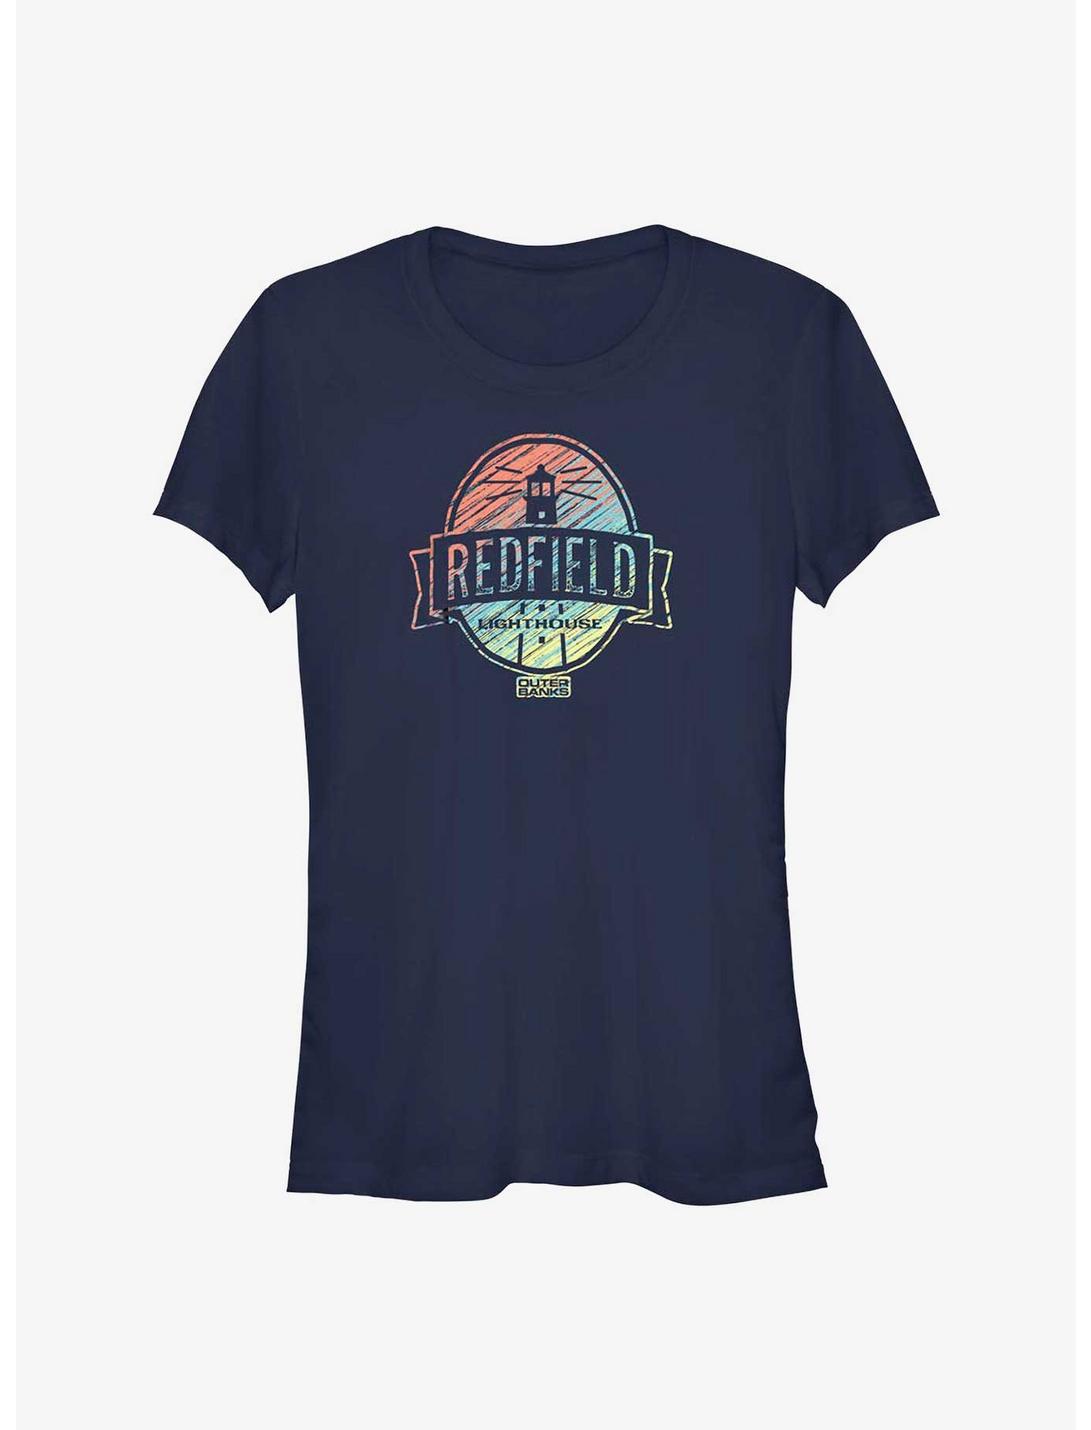 Outer Banks Redfield Lighthouse Girls T-Shirt, NAVY, hi-res